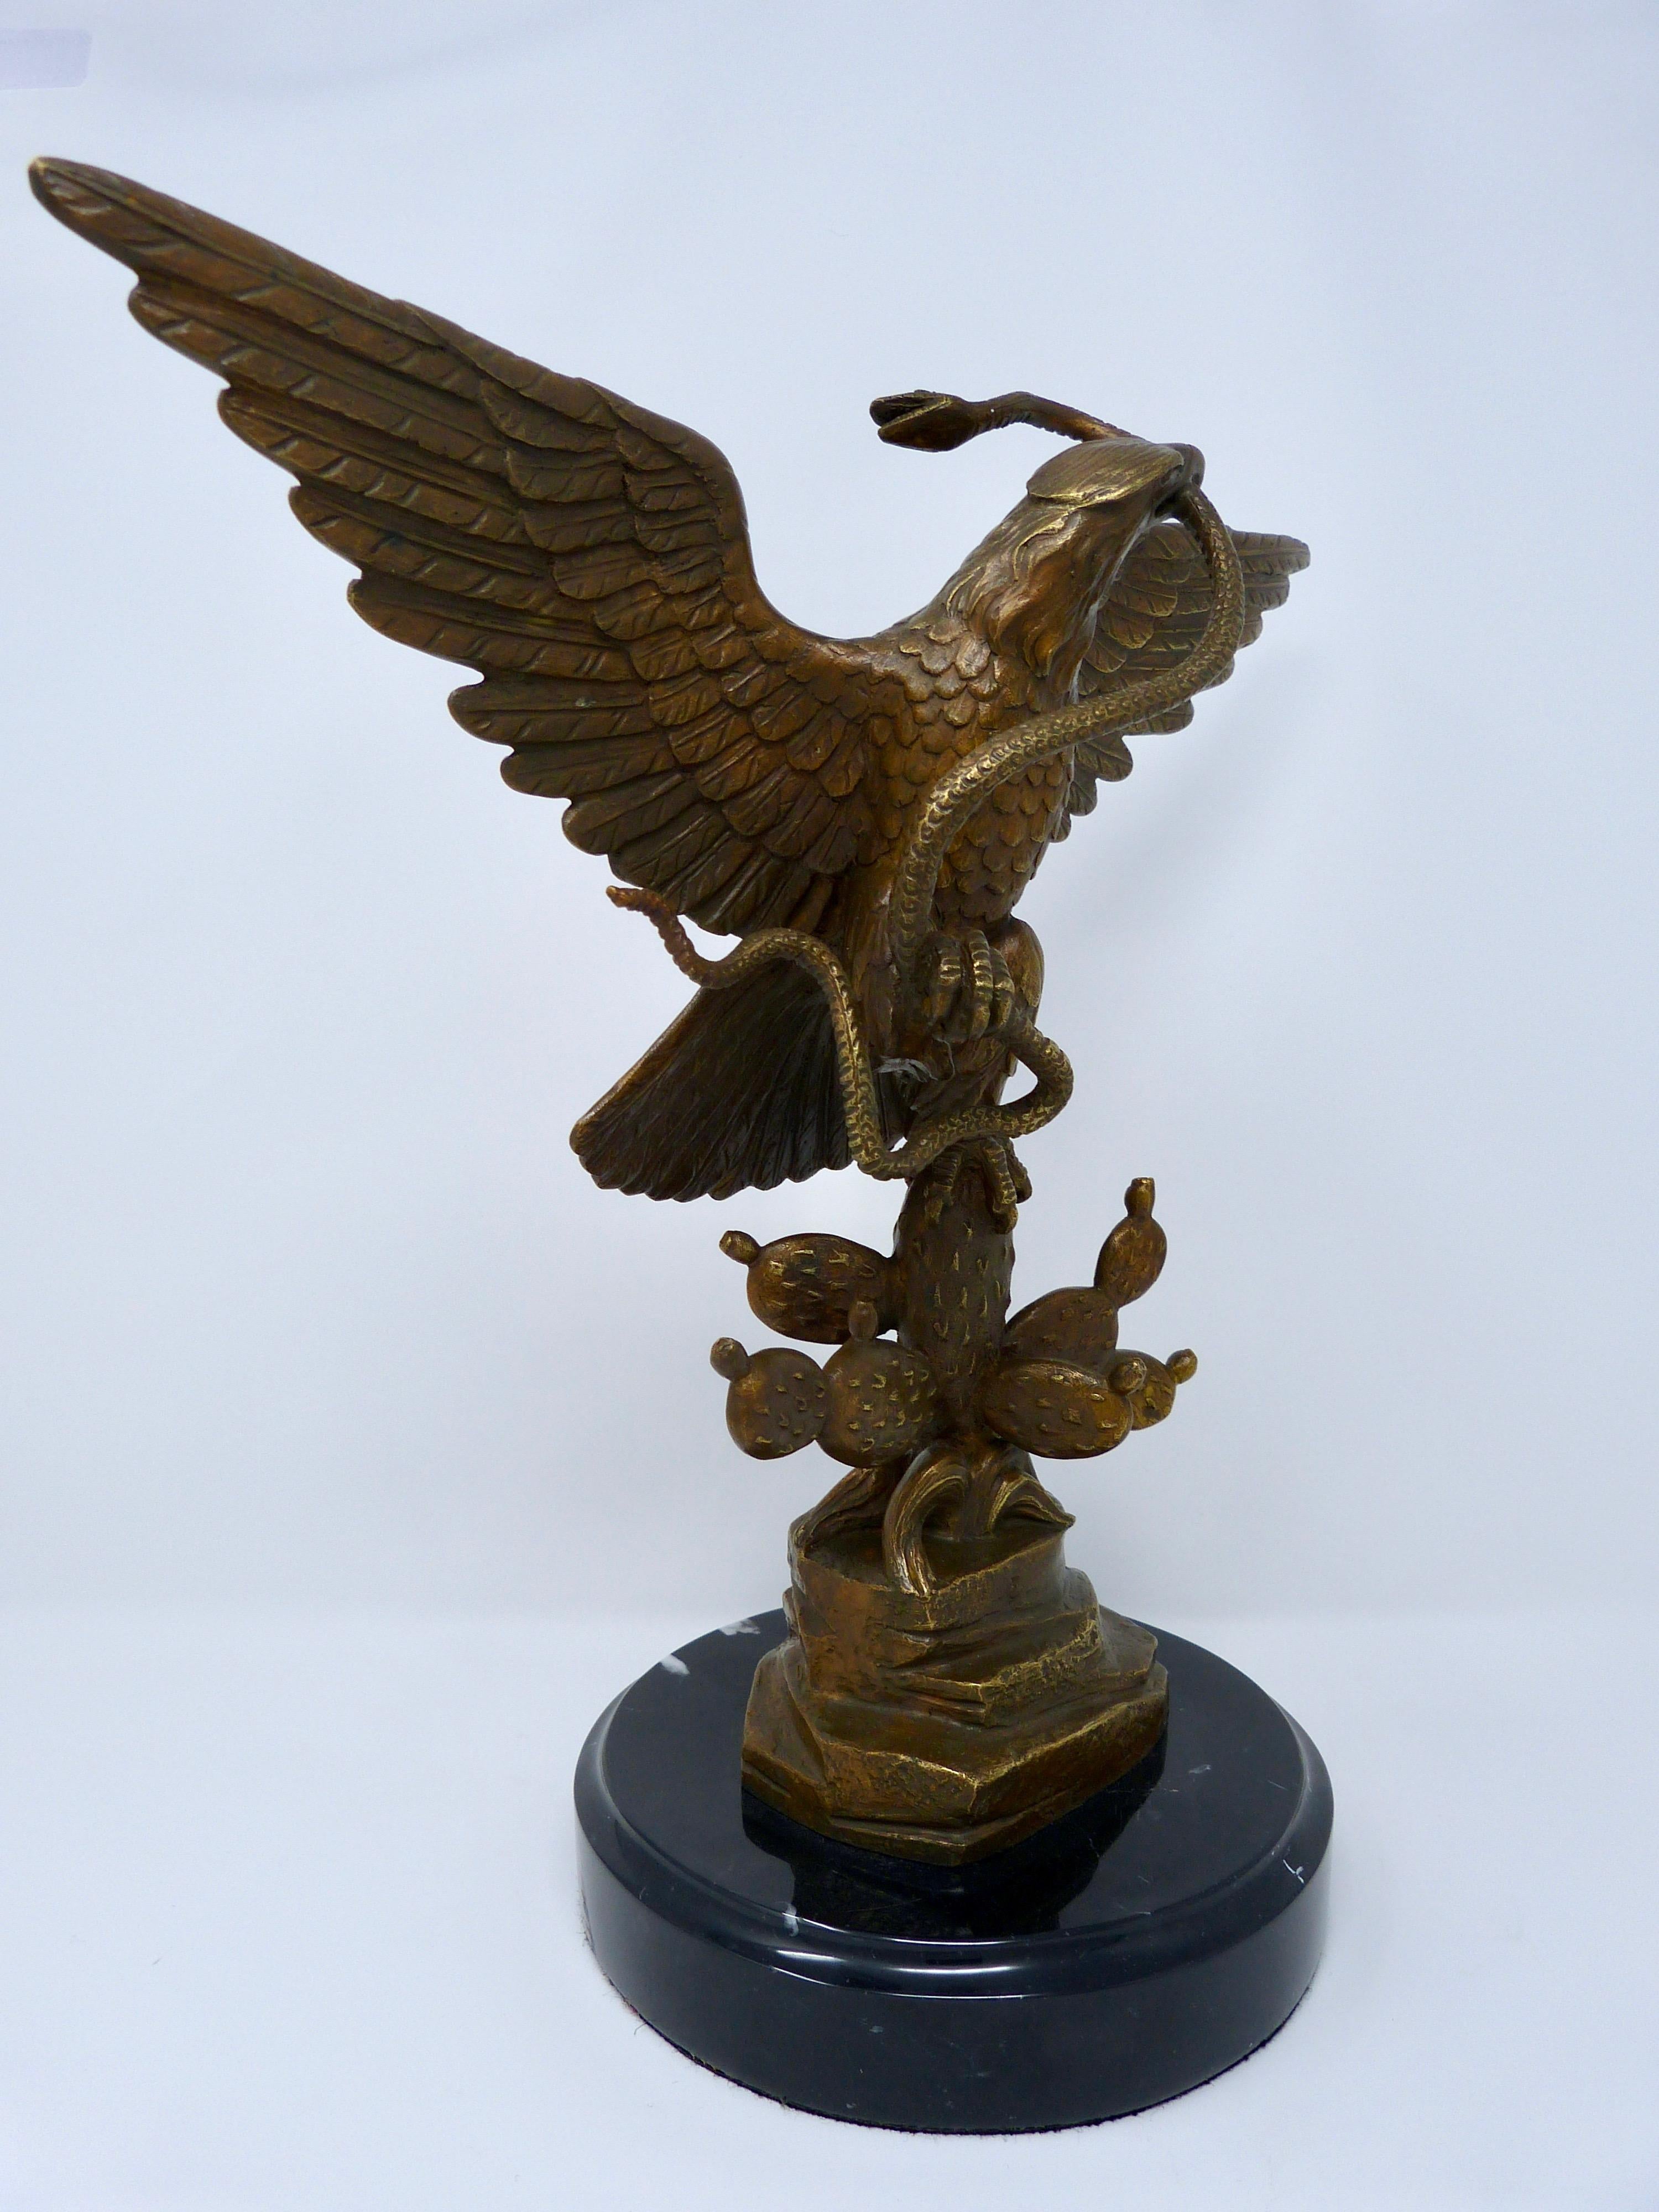 Mexican republican eagle made of bronze with marble base
Signed Carlos Espino, dated 1993
Edition of 300 pieces, made in Mexico
Comes with certificate from artist
Excellent conditions.